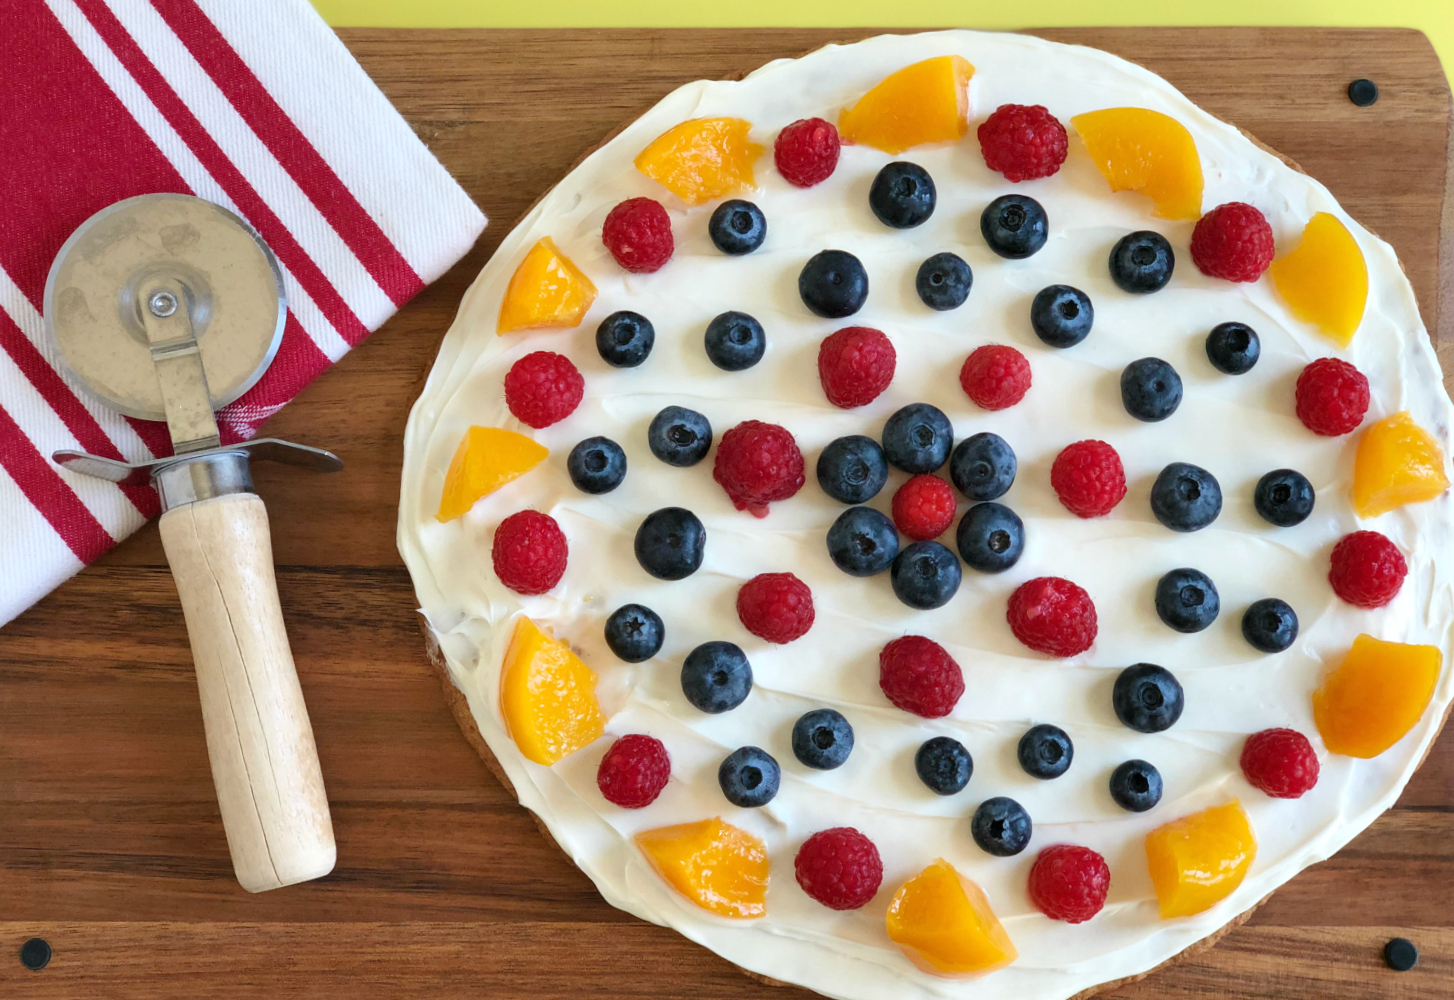 Make Cake Mix Fruit Pizza Cookie